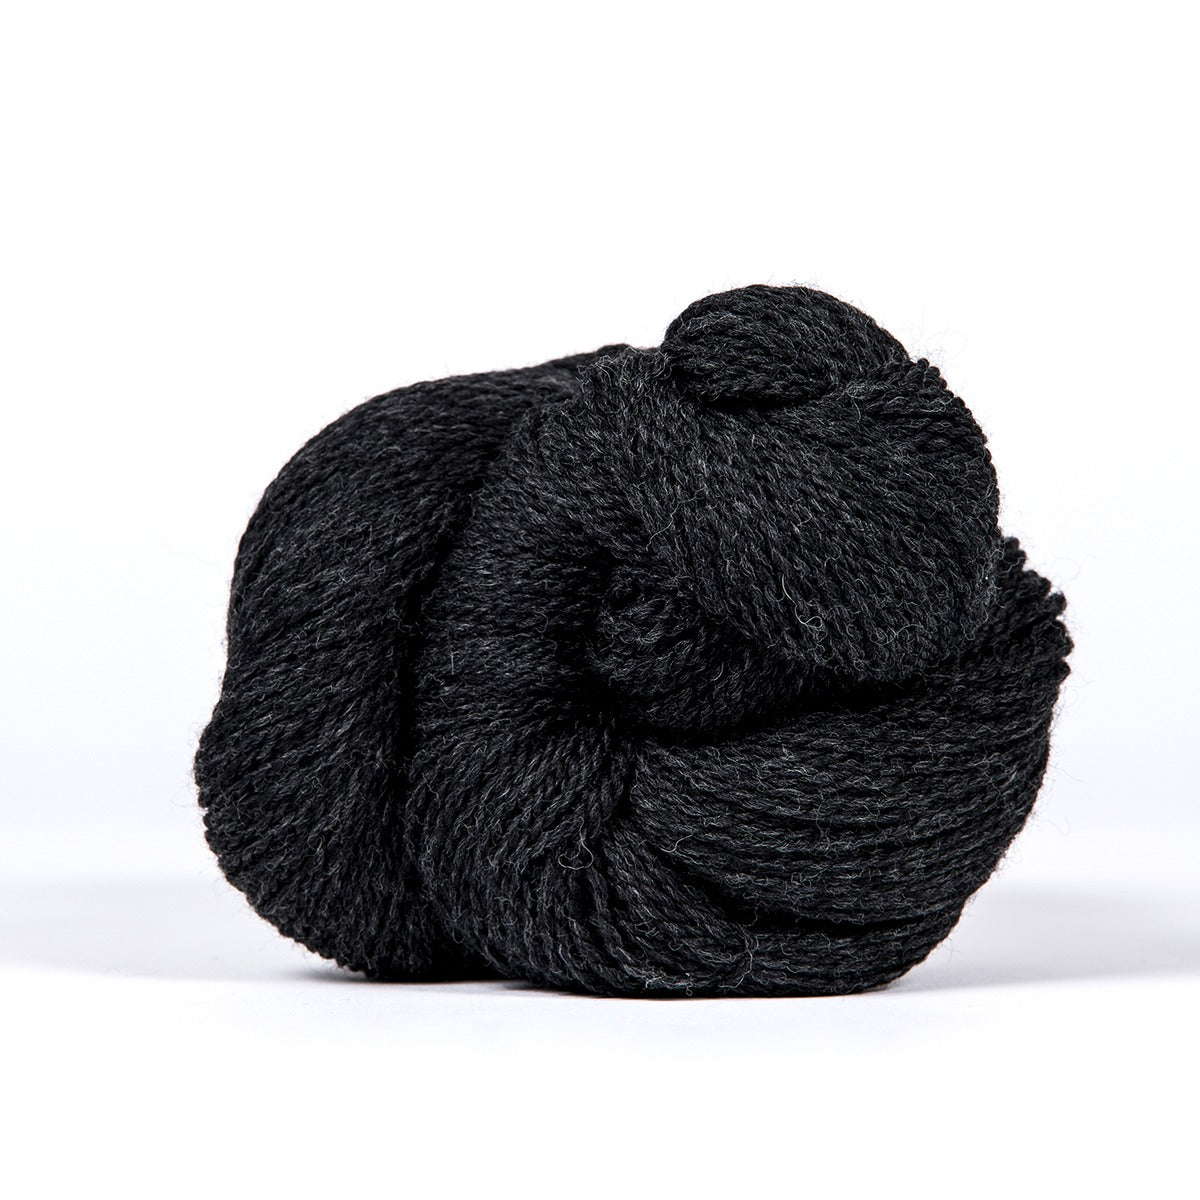 Kelbourne Woolens Yarn 026 charcoal heather Scout